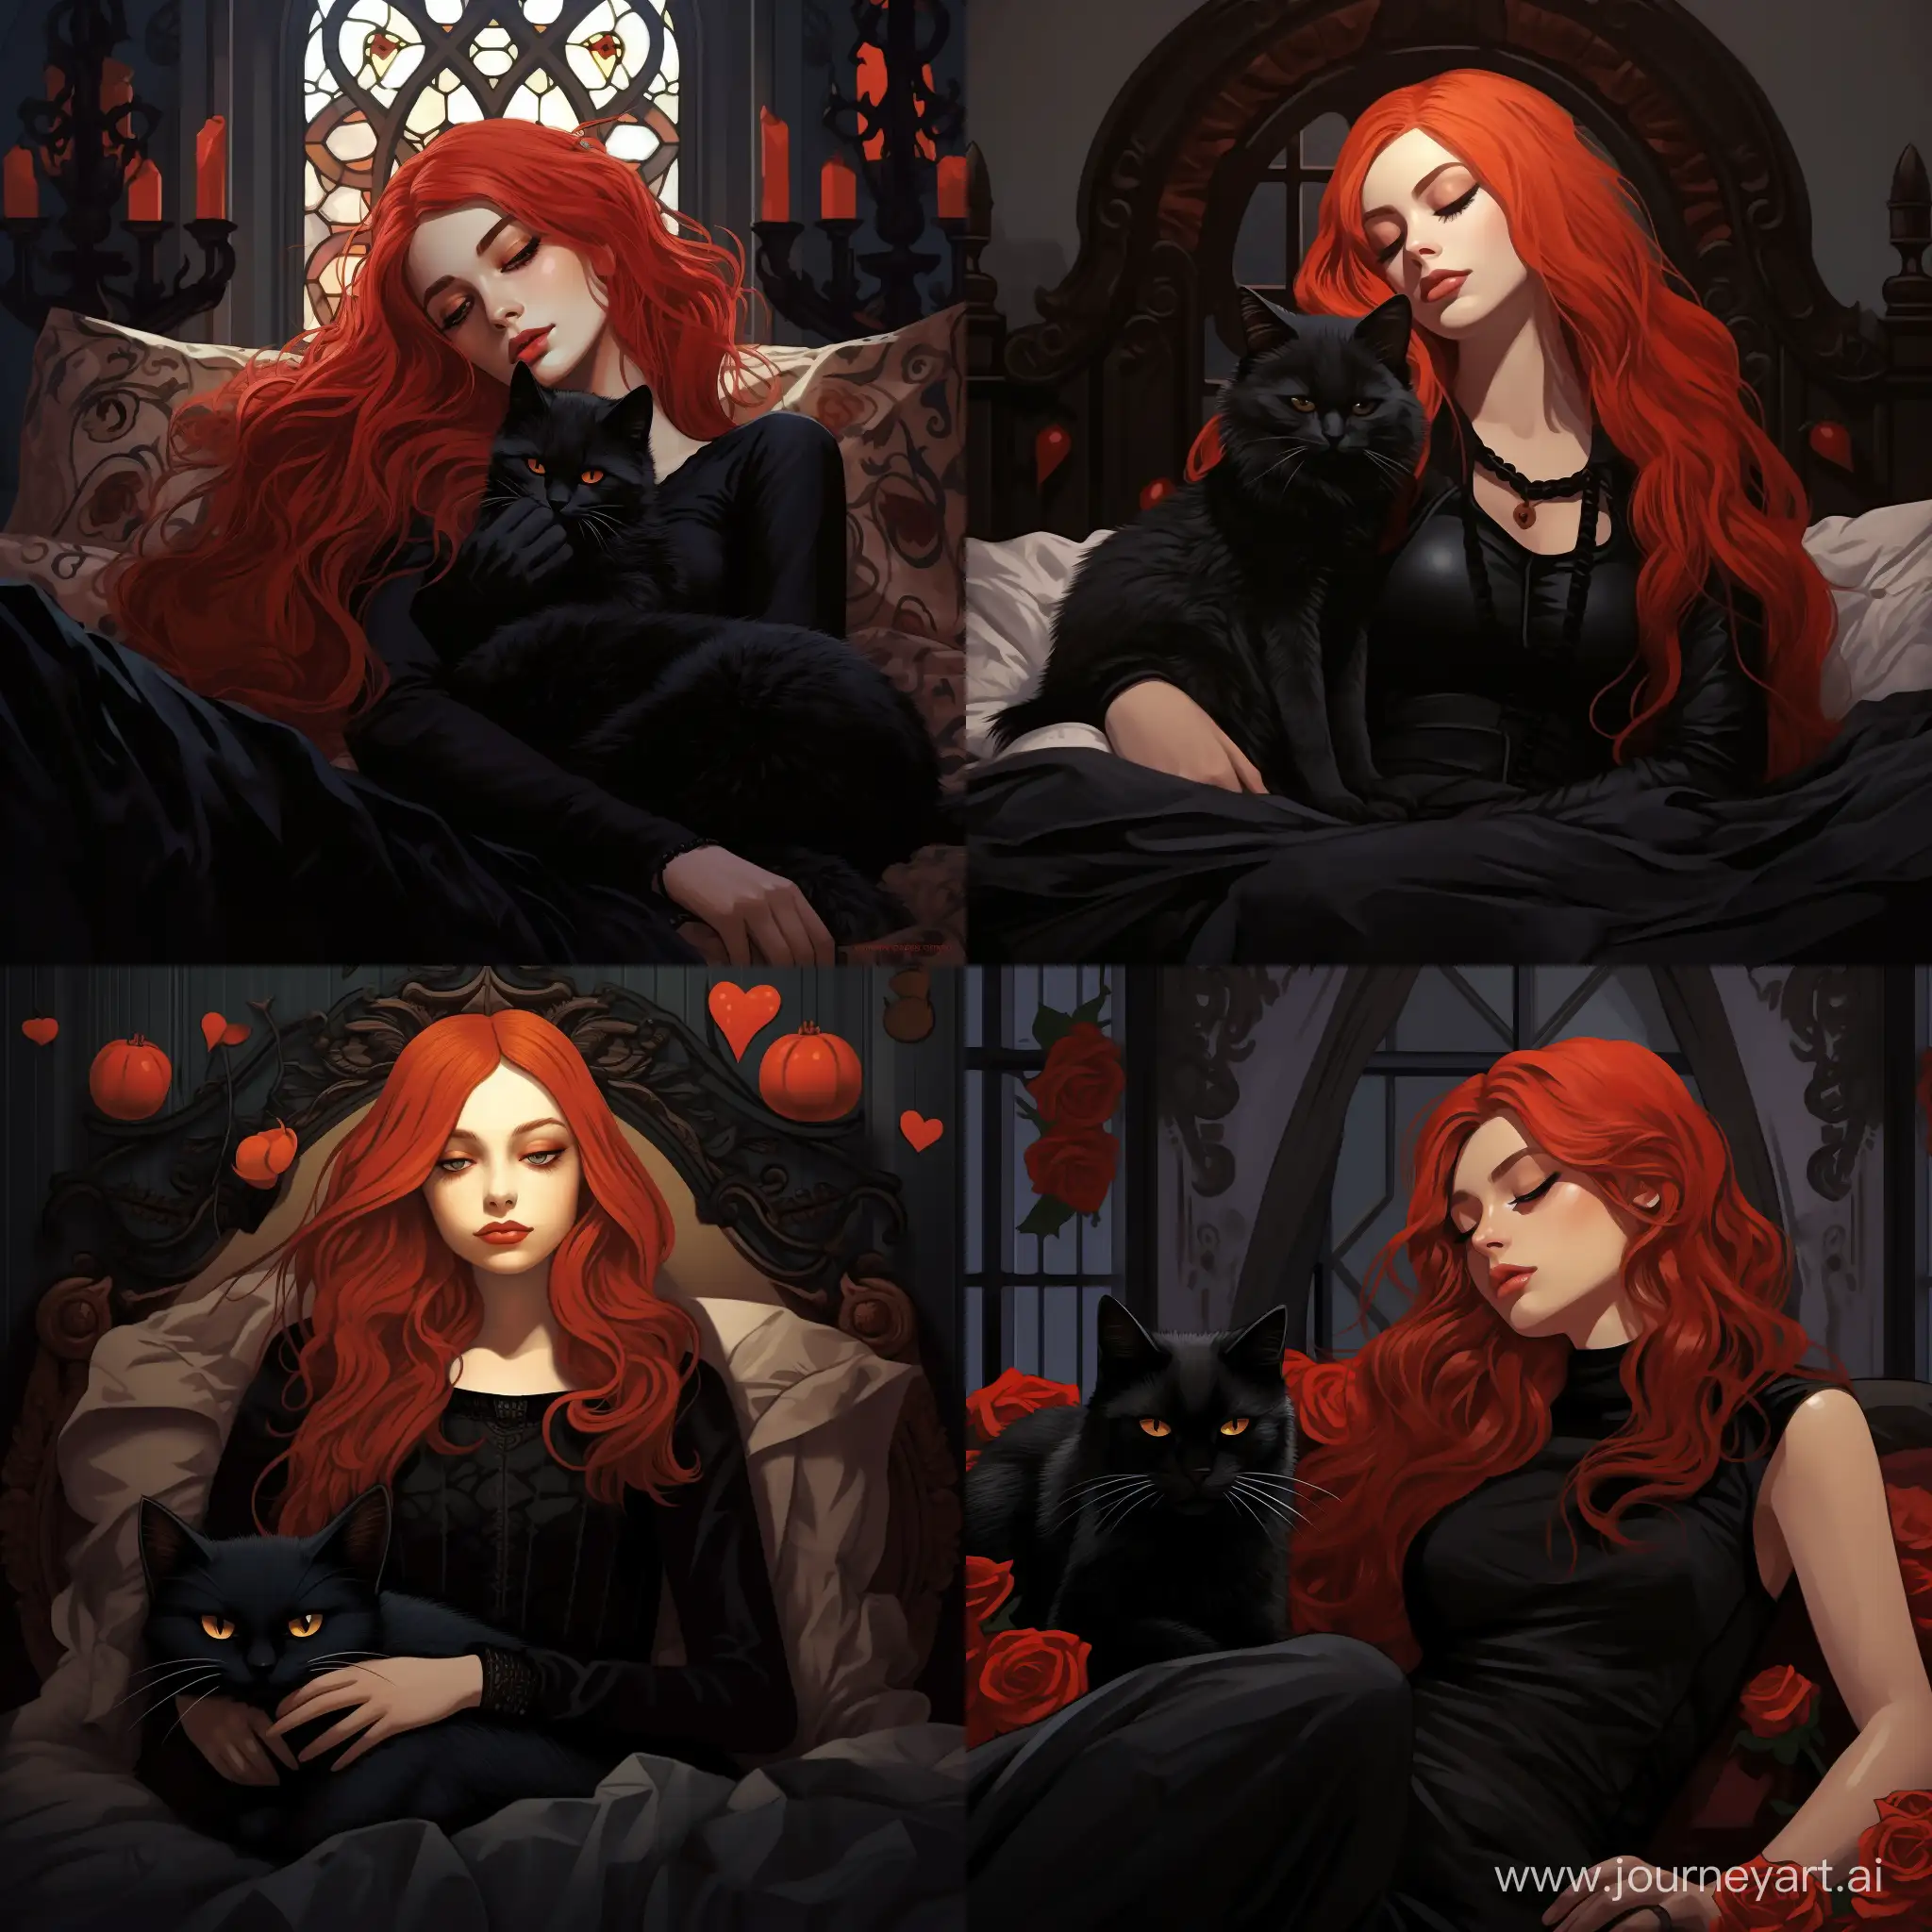 Dreamy-Gothic-Girl-with-Red-Hair-Sleeping-Next-to-Stylish-Gothic-Cat